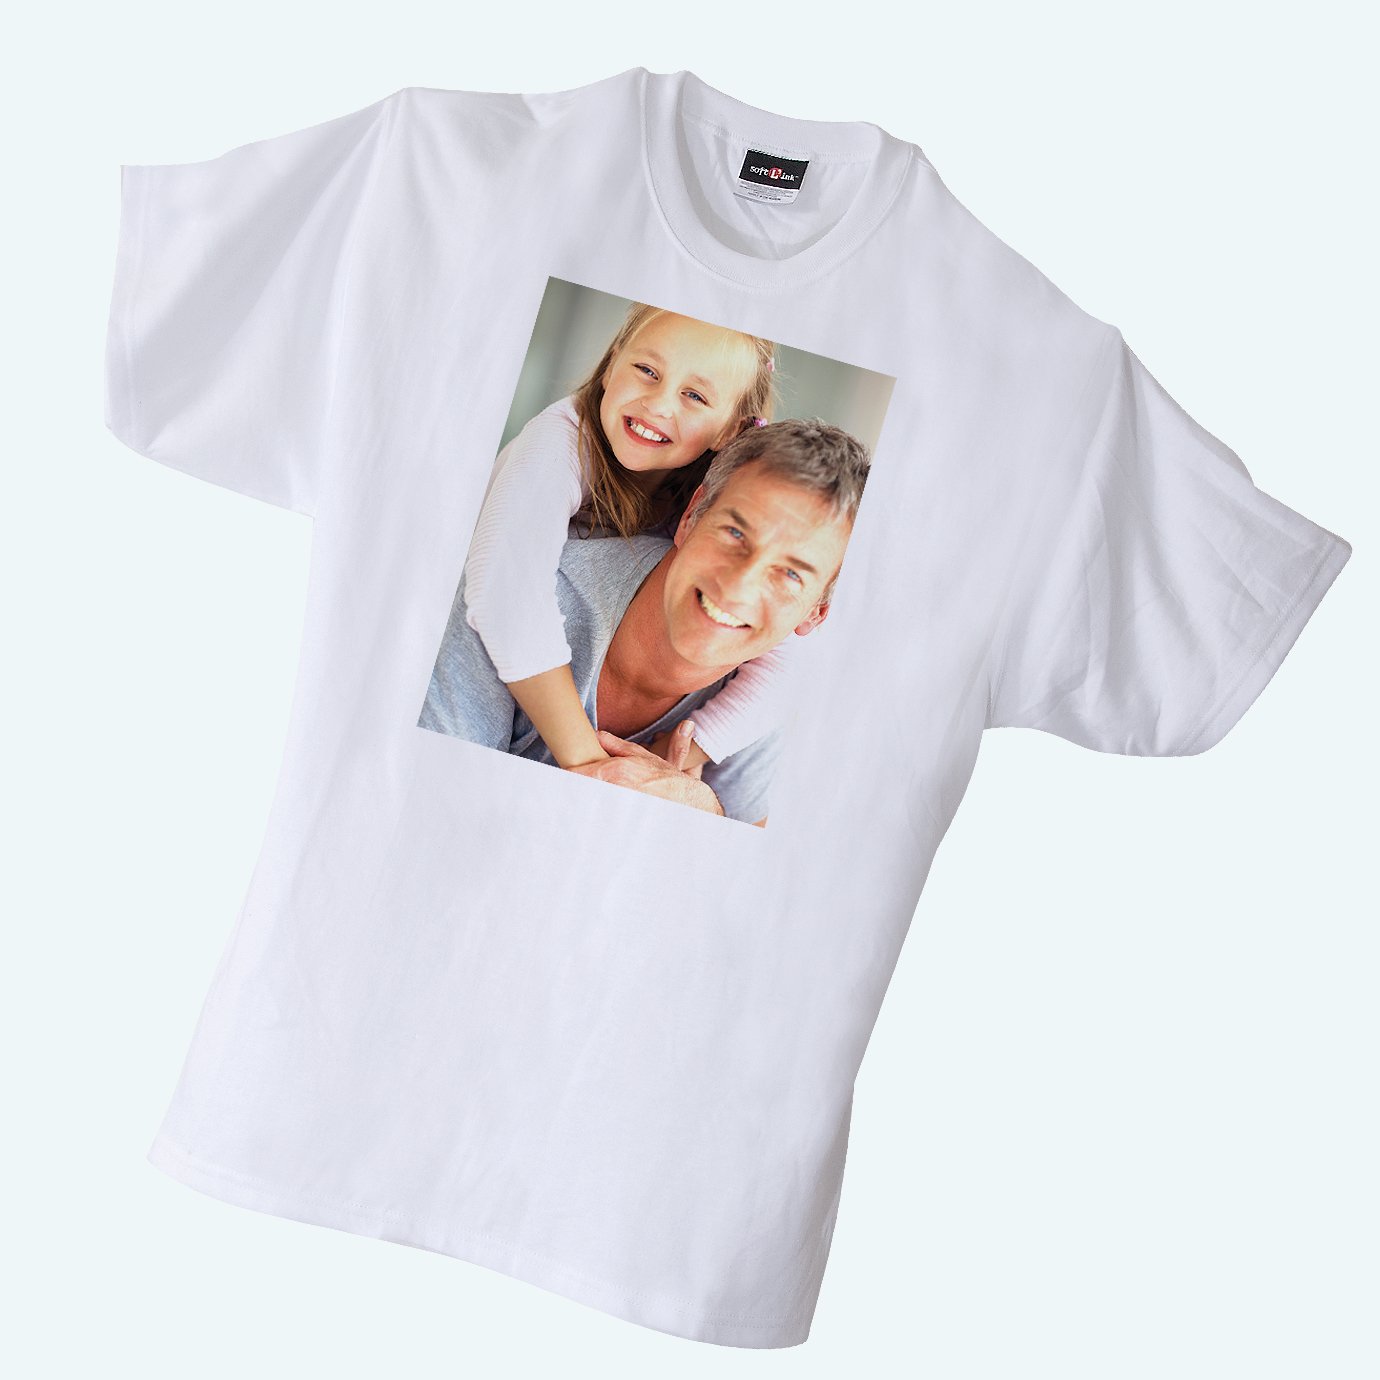 T shirt Printing Online - Customized T-shirts Starting from Just 1